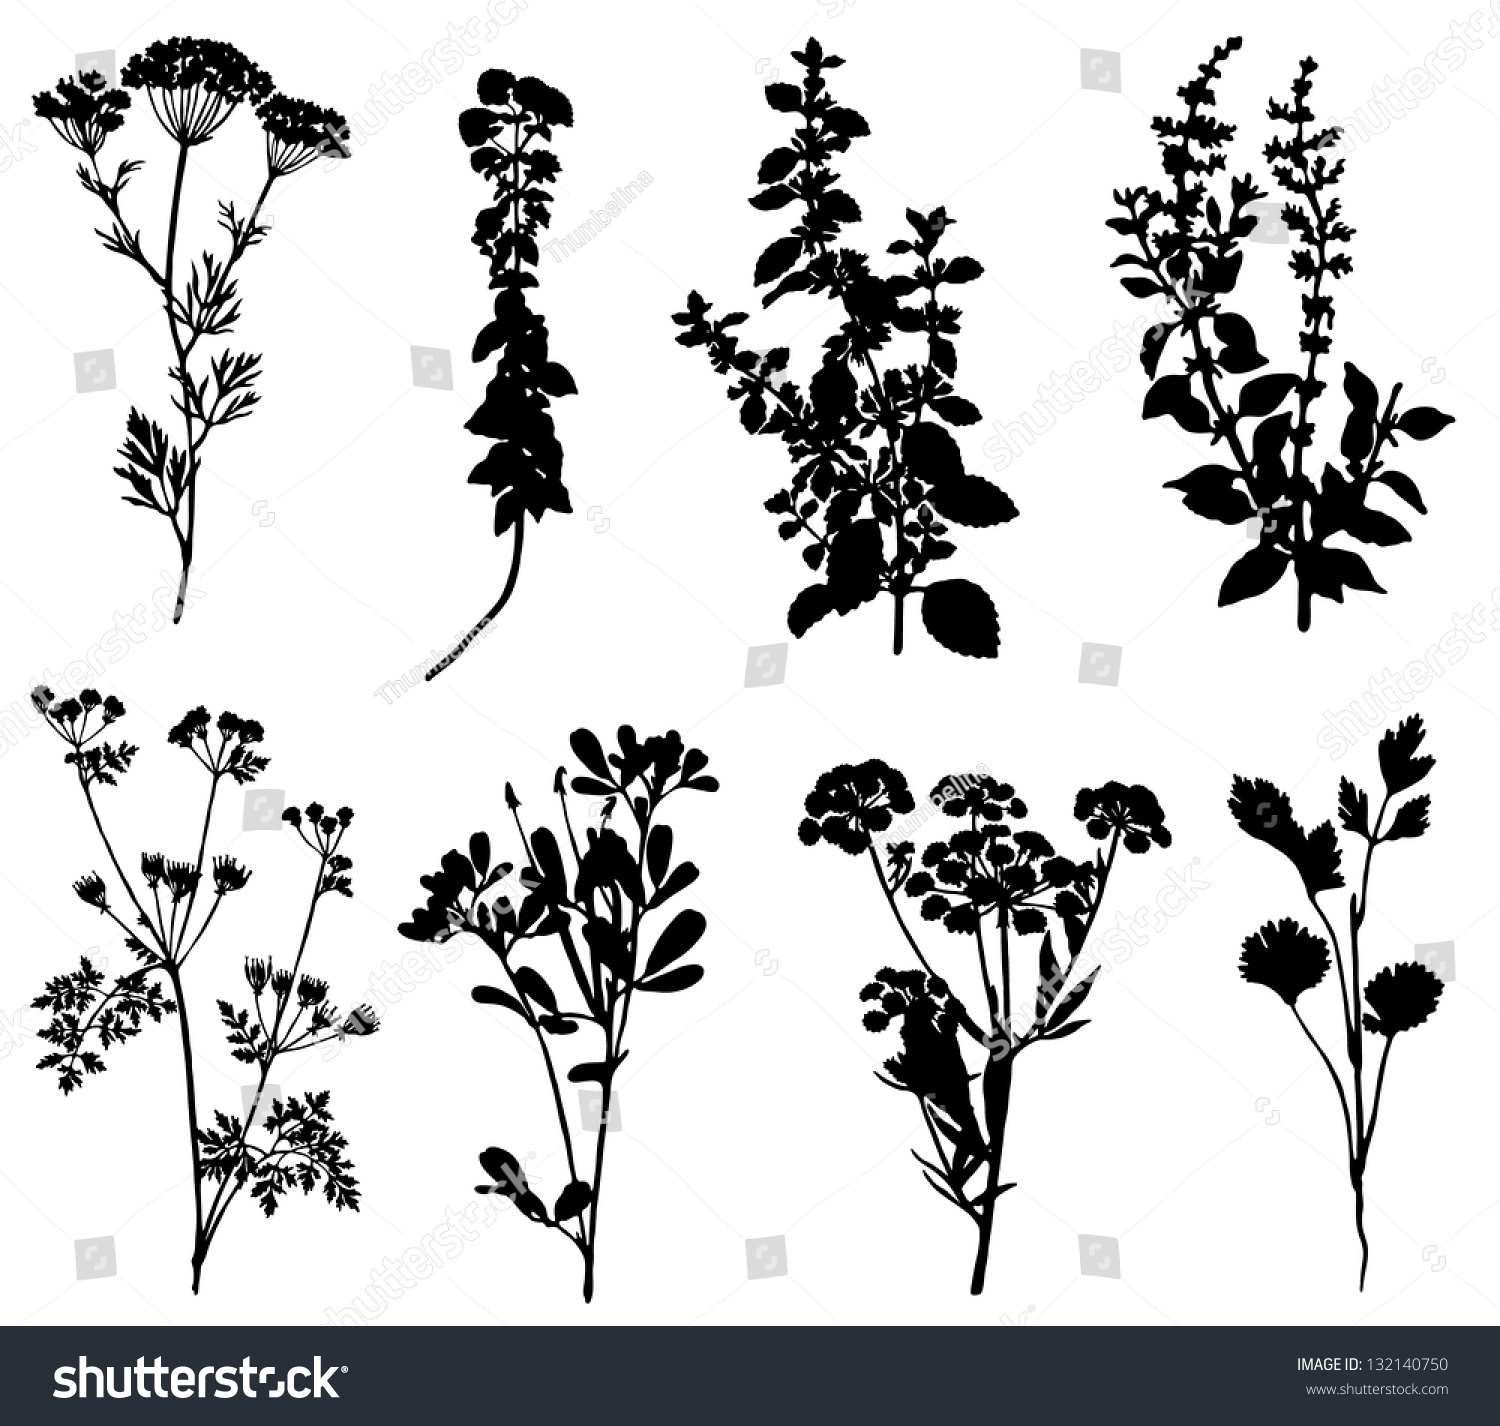 Collection Of Silhouettes Of Spicy Herbs Stock Vector Illustration ...